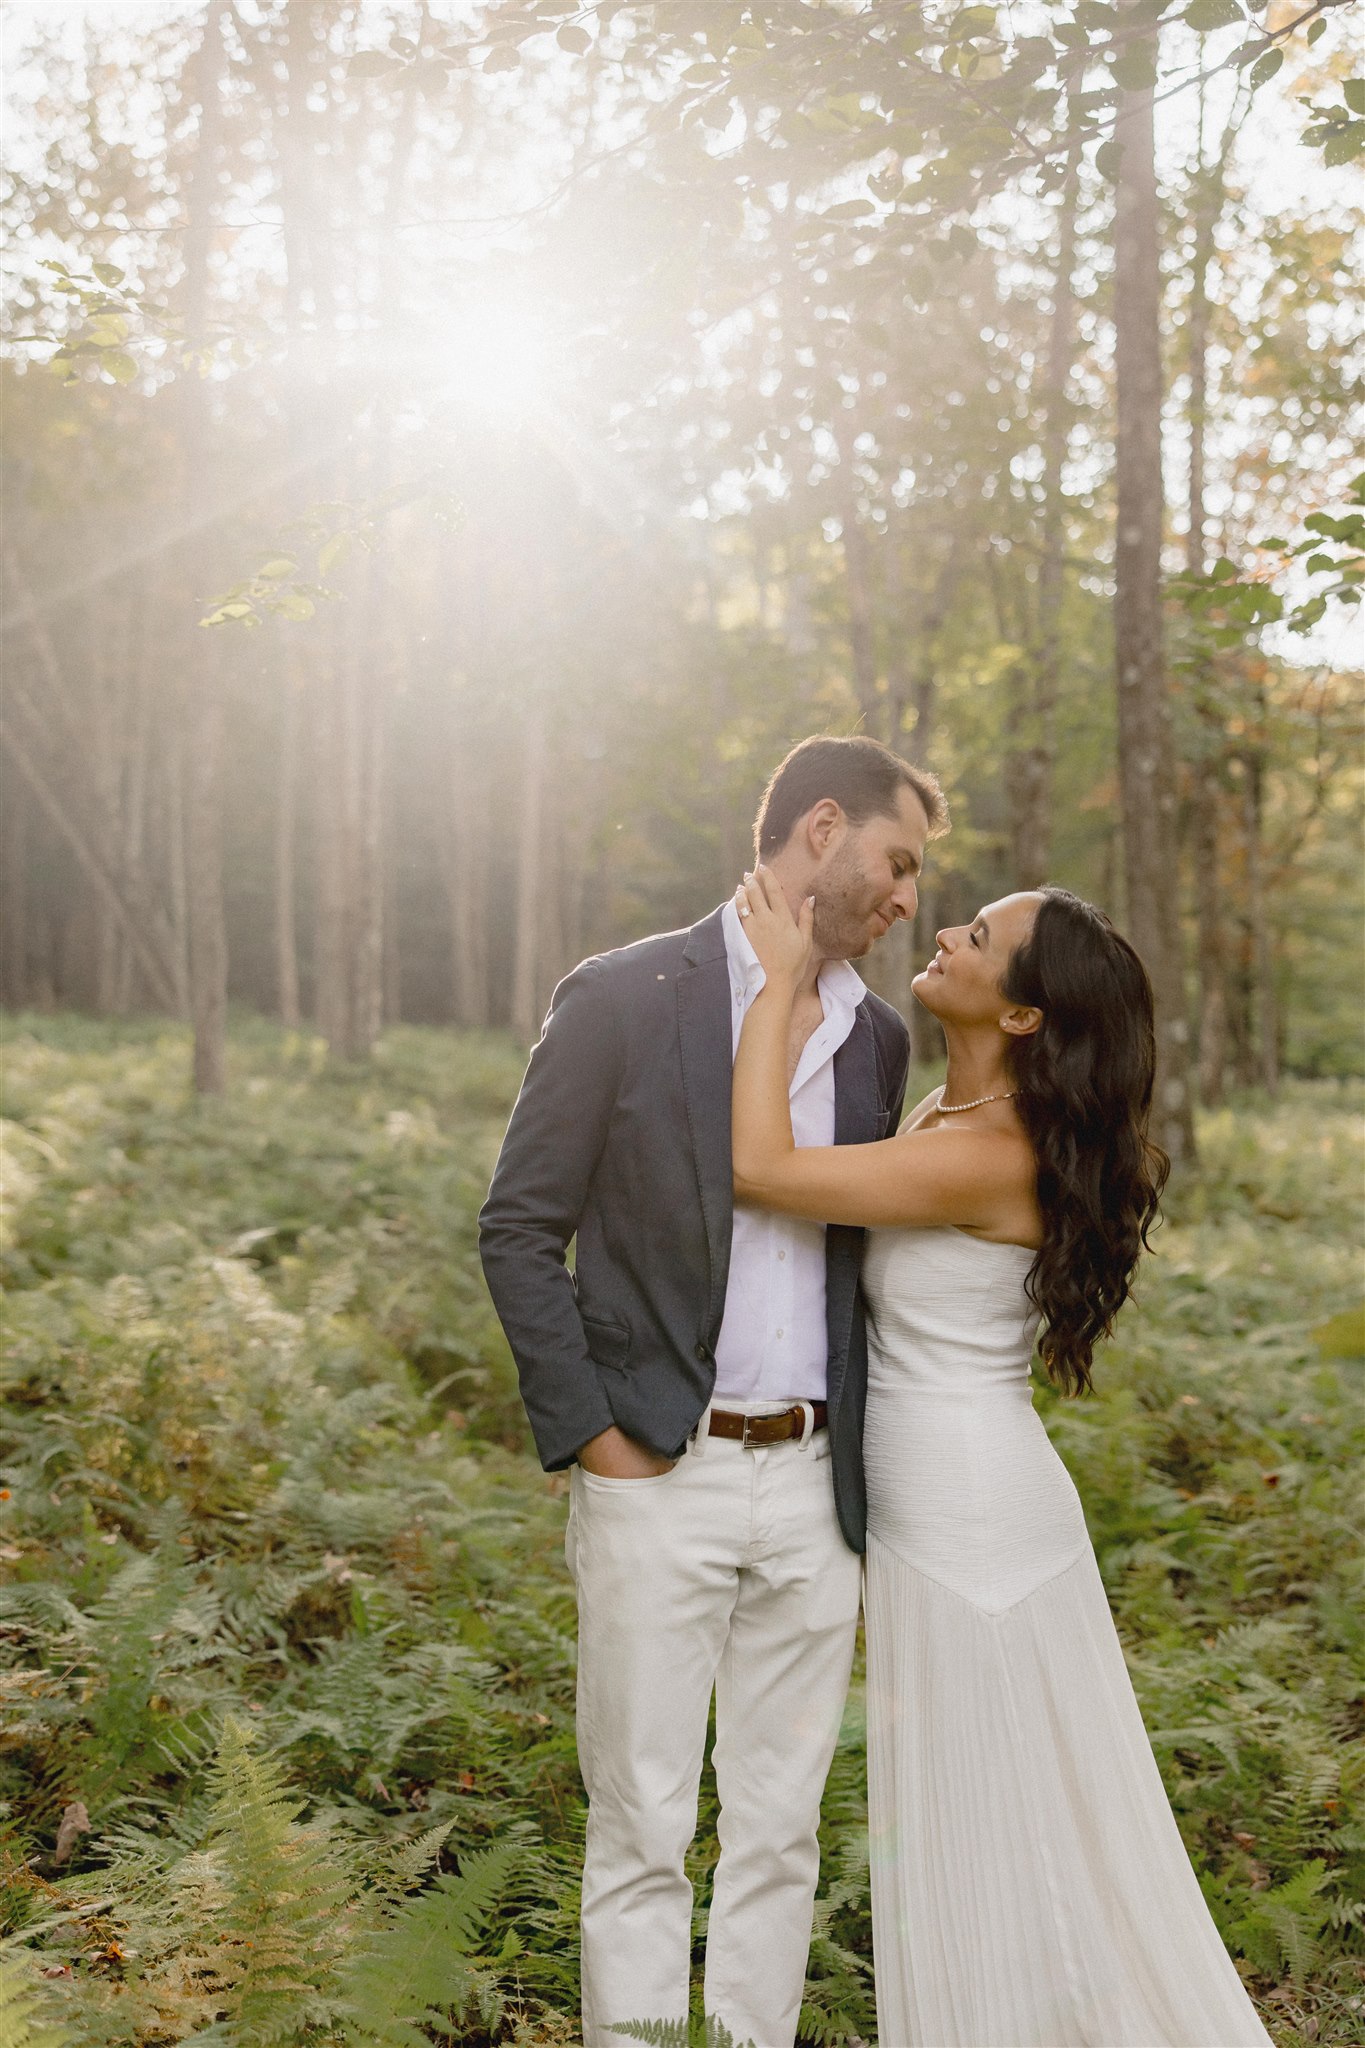 Bride and groom pose romantically with the nature in background